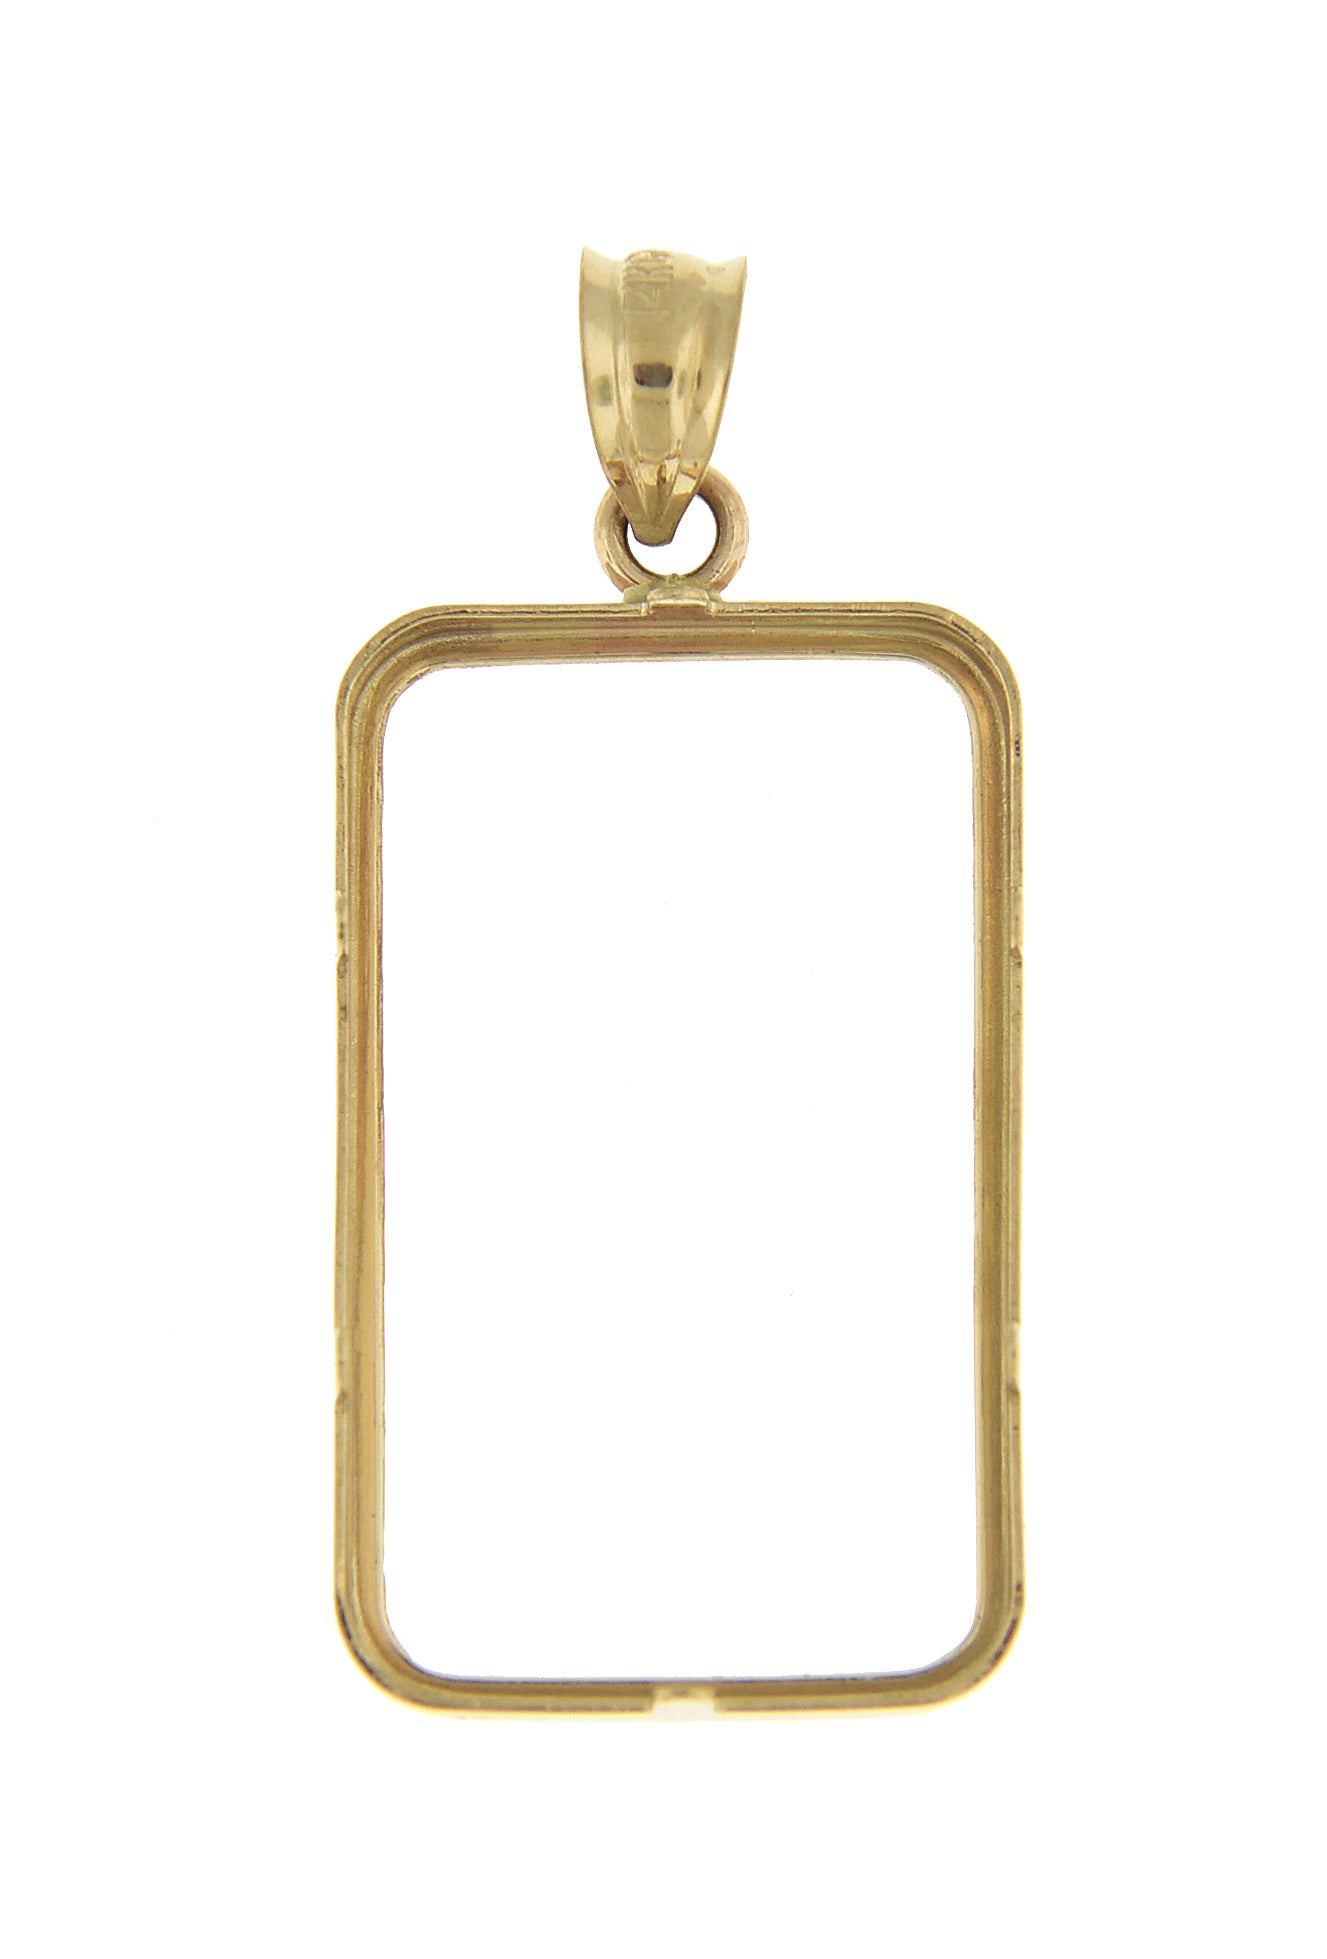 14K Yellow Gold Holds 23.5mm x 14mm Coins Credit Suisse 5 gram Tab Back Frame Mounting Holder Pendant Charm